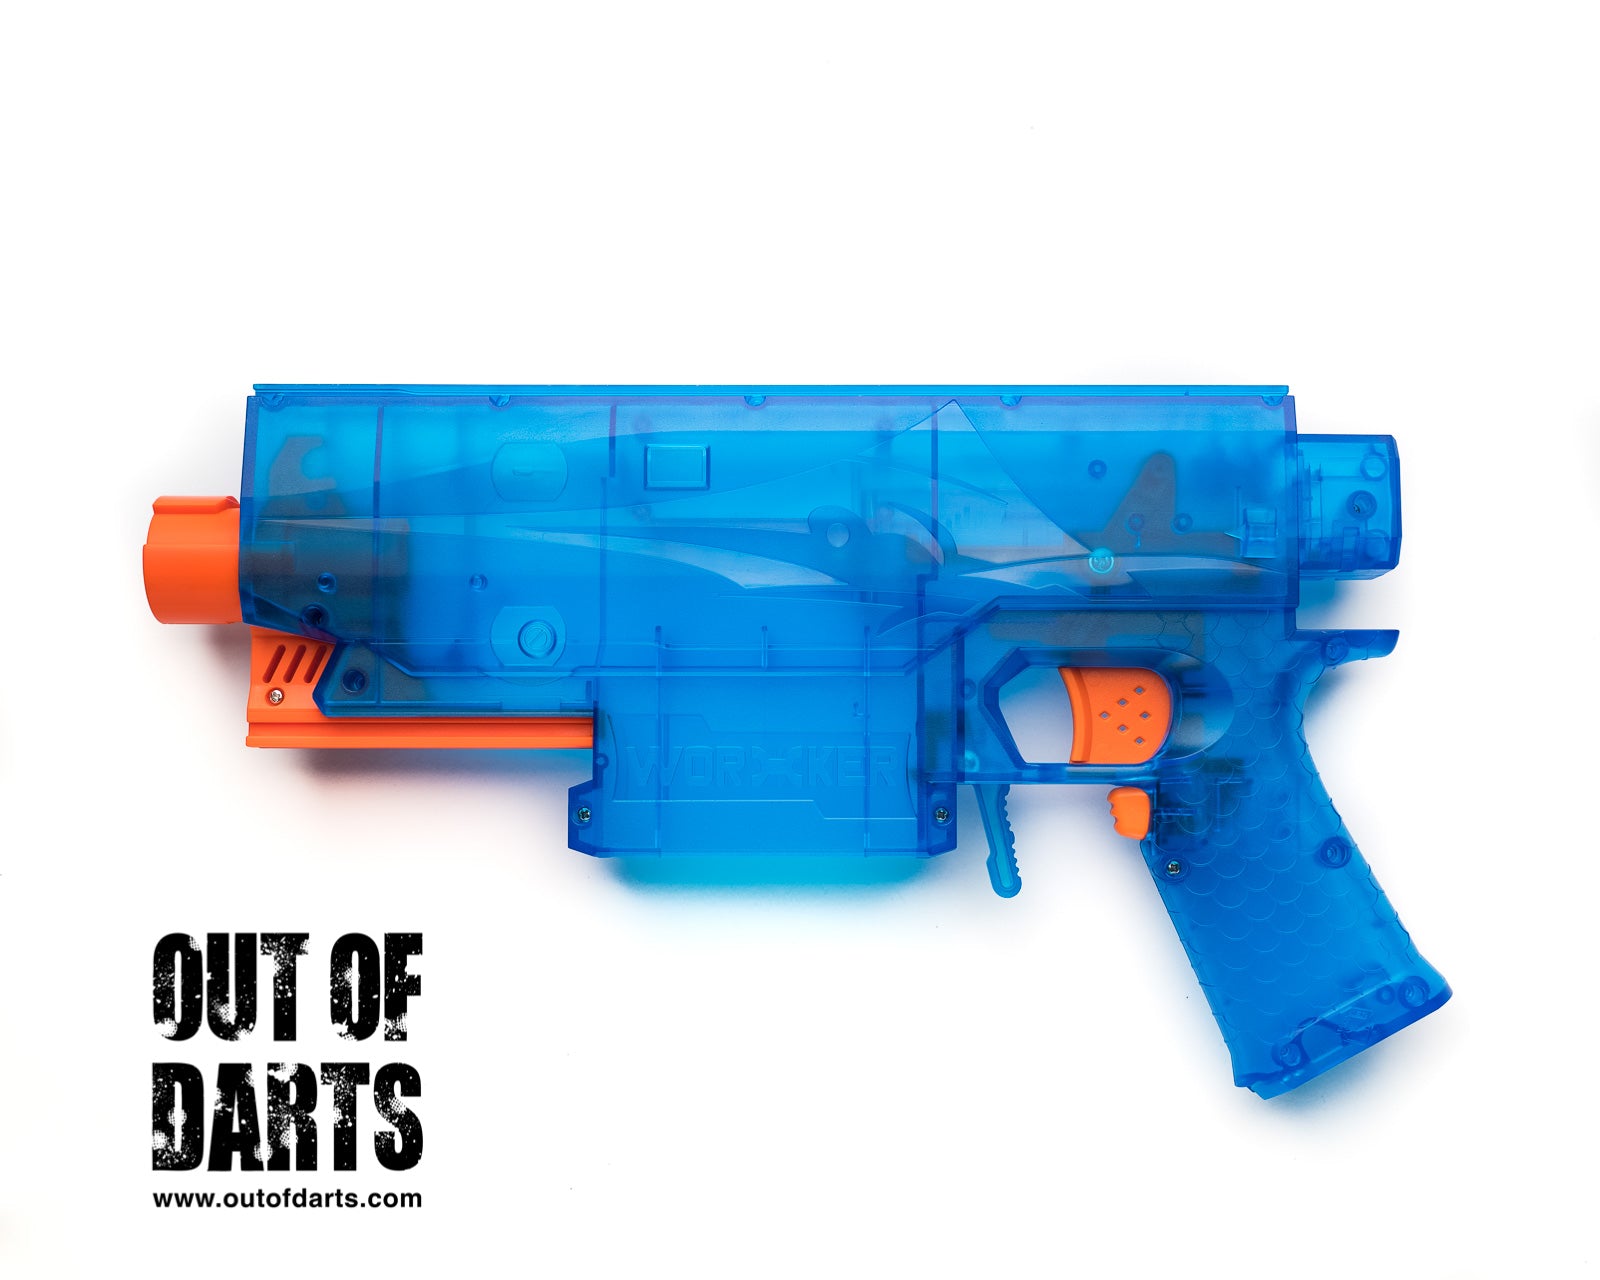 Worker Swordfish (Shell Kit Stryfe) – Out of